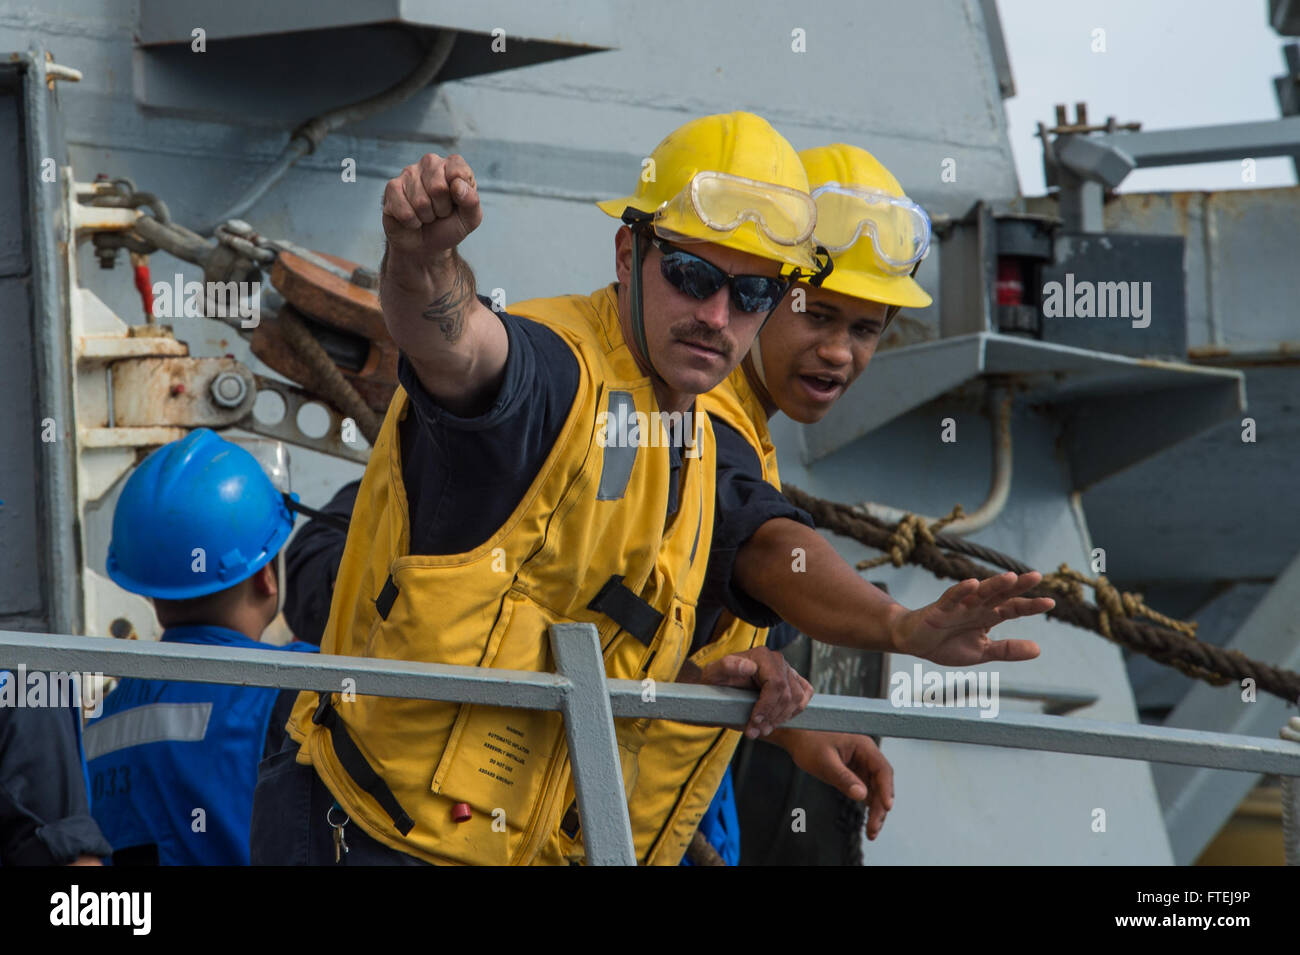 MEDITERRANEAN SEA (Nov. 16, 2014) – Boatswain’s Mate 2nd Class Alan Farthing, left, from Grove City, Ohio, and Boatswain’s Mate 3rd Class Dontrell Dorsett, from Fort Worth, Texas, give instructions to line handlers aboard USS Cole (DDG 67) during a replenishment at sea with the USNS Leroy Grumman (TAO 95). Cole, an Arleigh Burke-class guided-missile destroyer homeported in Norfolk, is conducting naval operations in the U.S. 6th Fleet area of operations in support of U.S. national security interests in Europe. Stock Photo